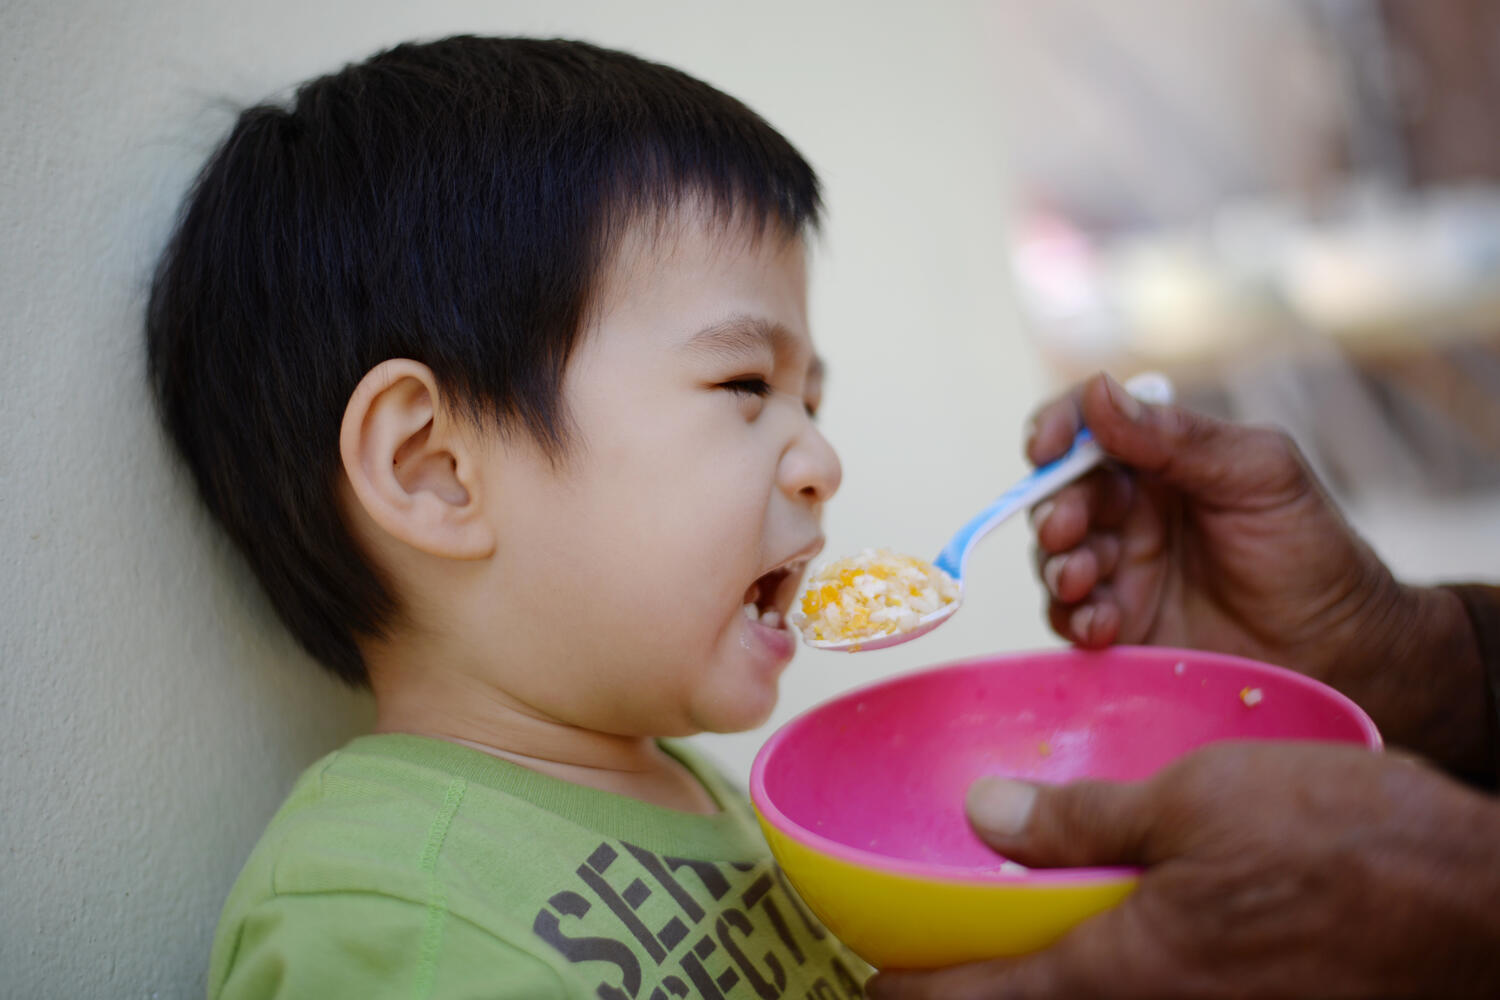 Feeding forcibly aggravates fussy eating in toddlers